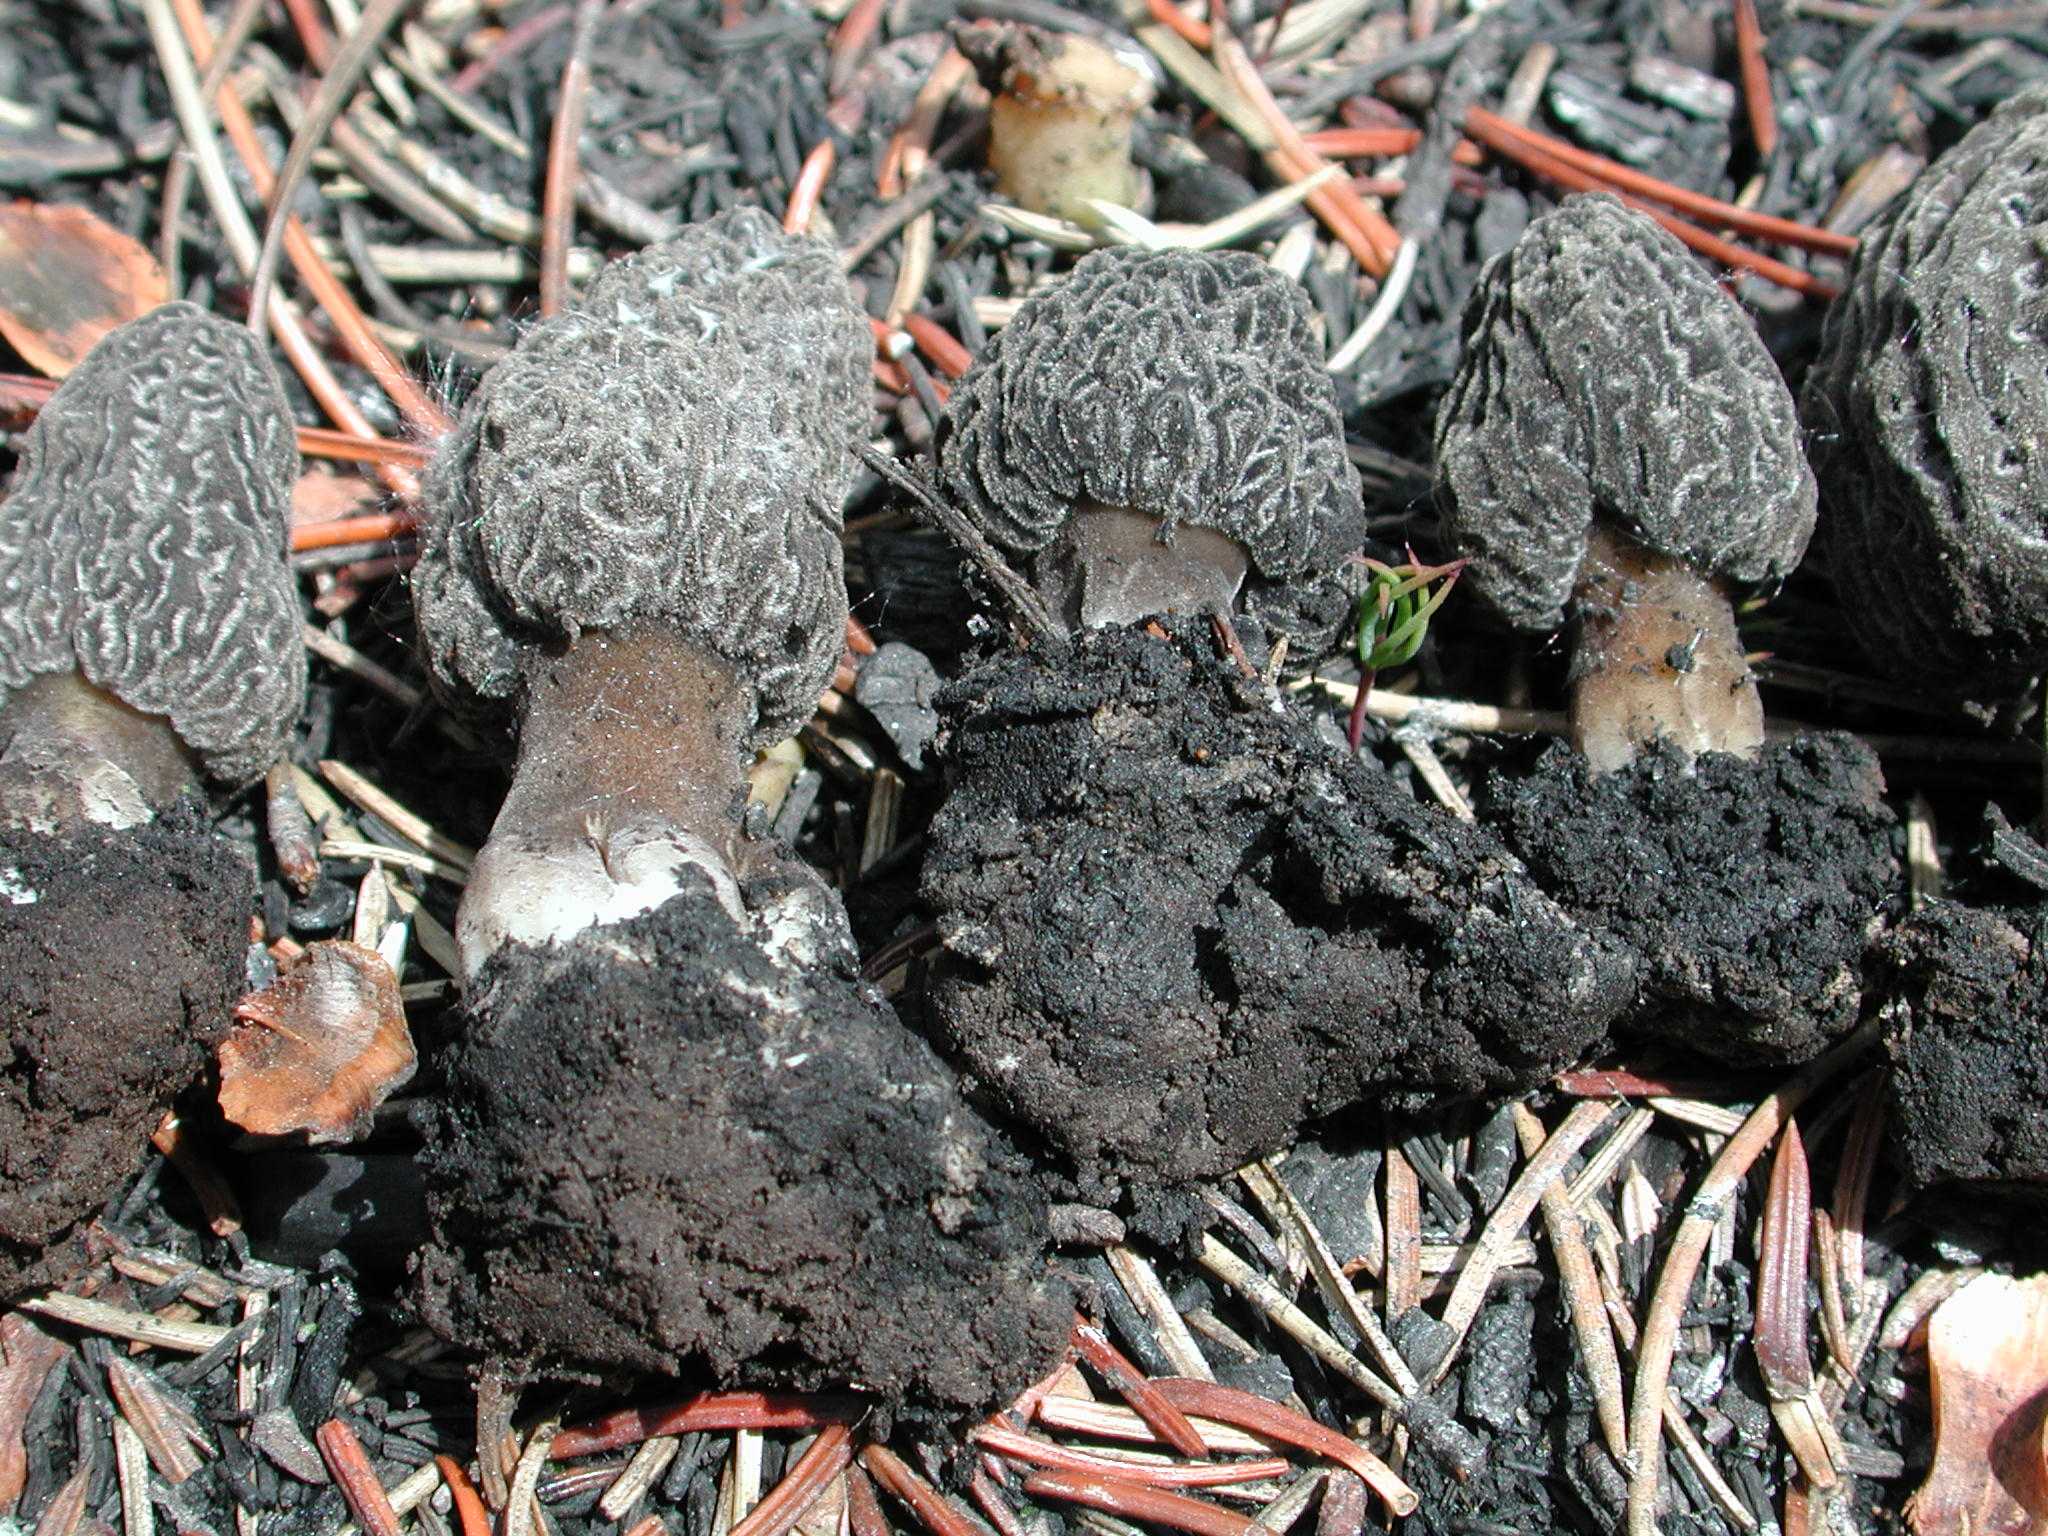 Grey fire morels often appear in greater-than-normal quantities in areas where wildfires have occurred.